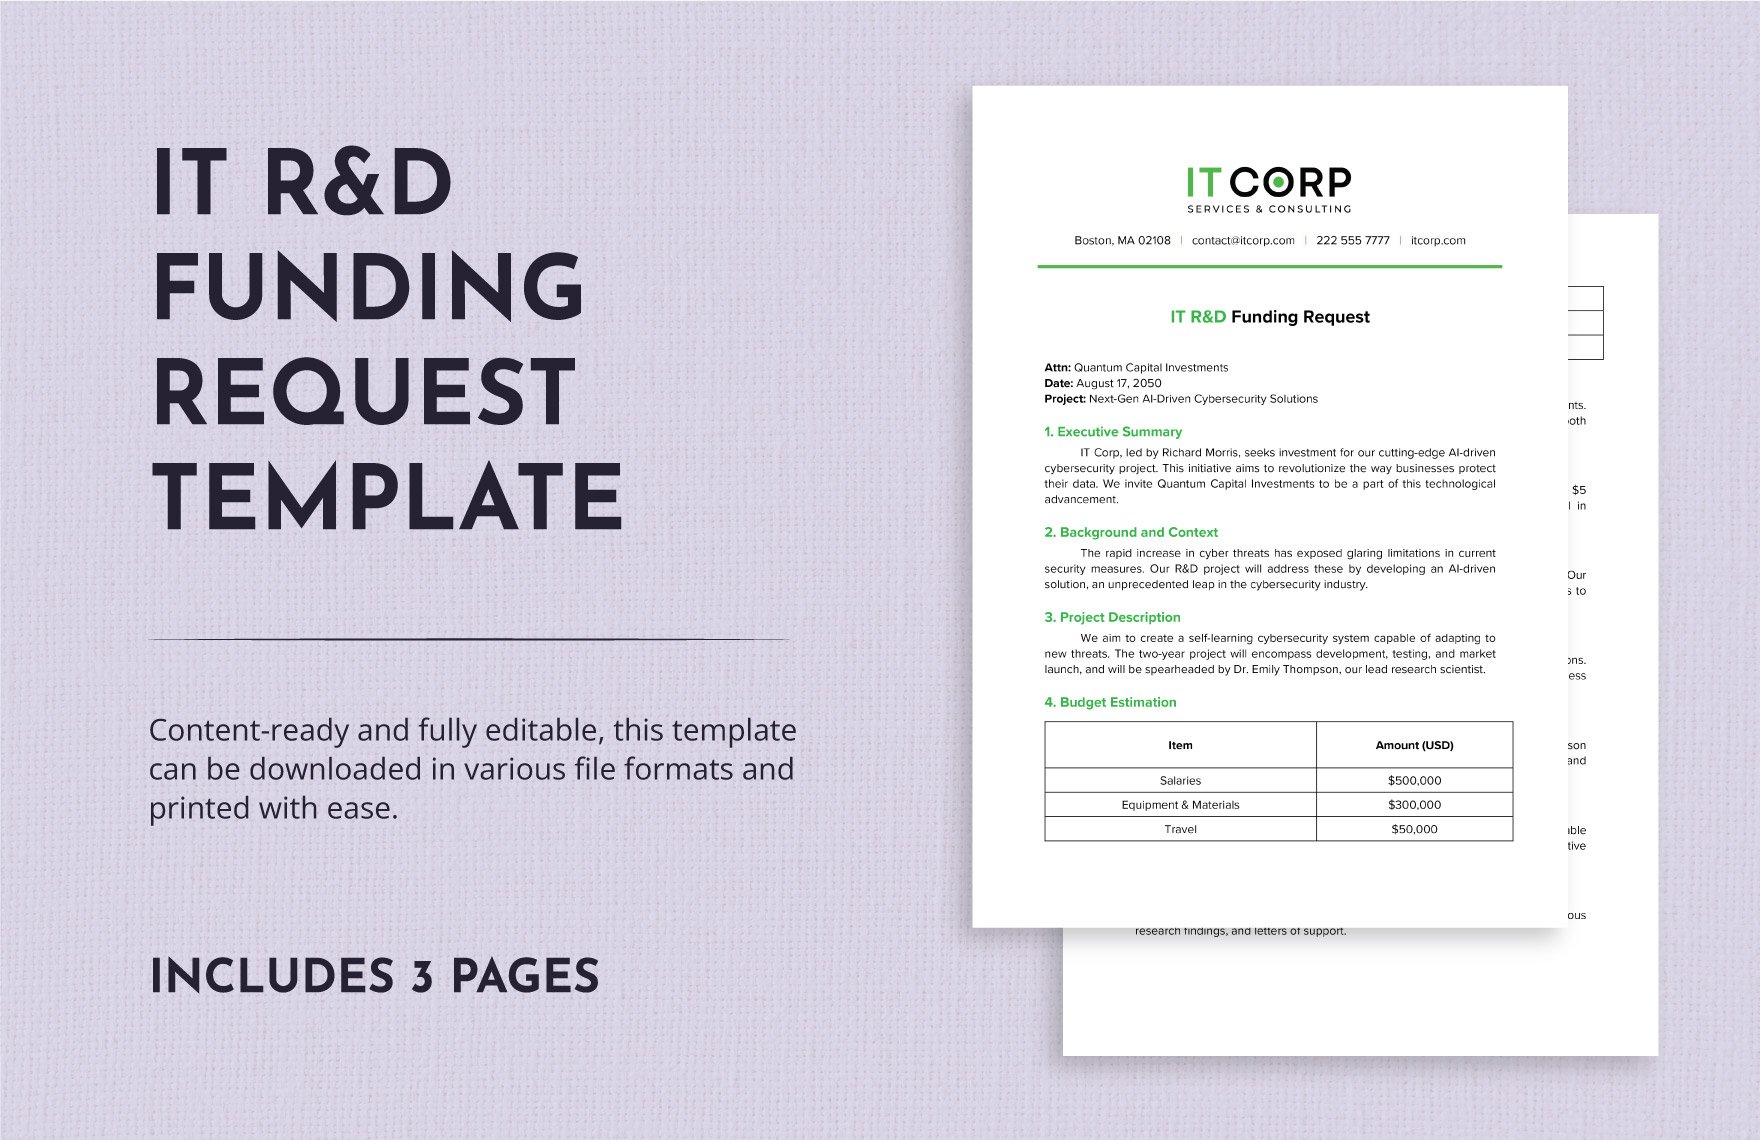 IT R&D Funding Request Template in Word, Google Docs, PDF